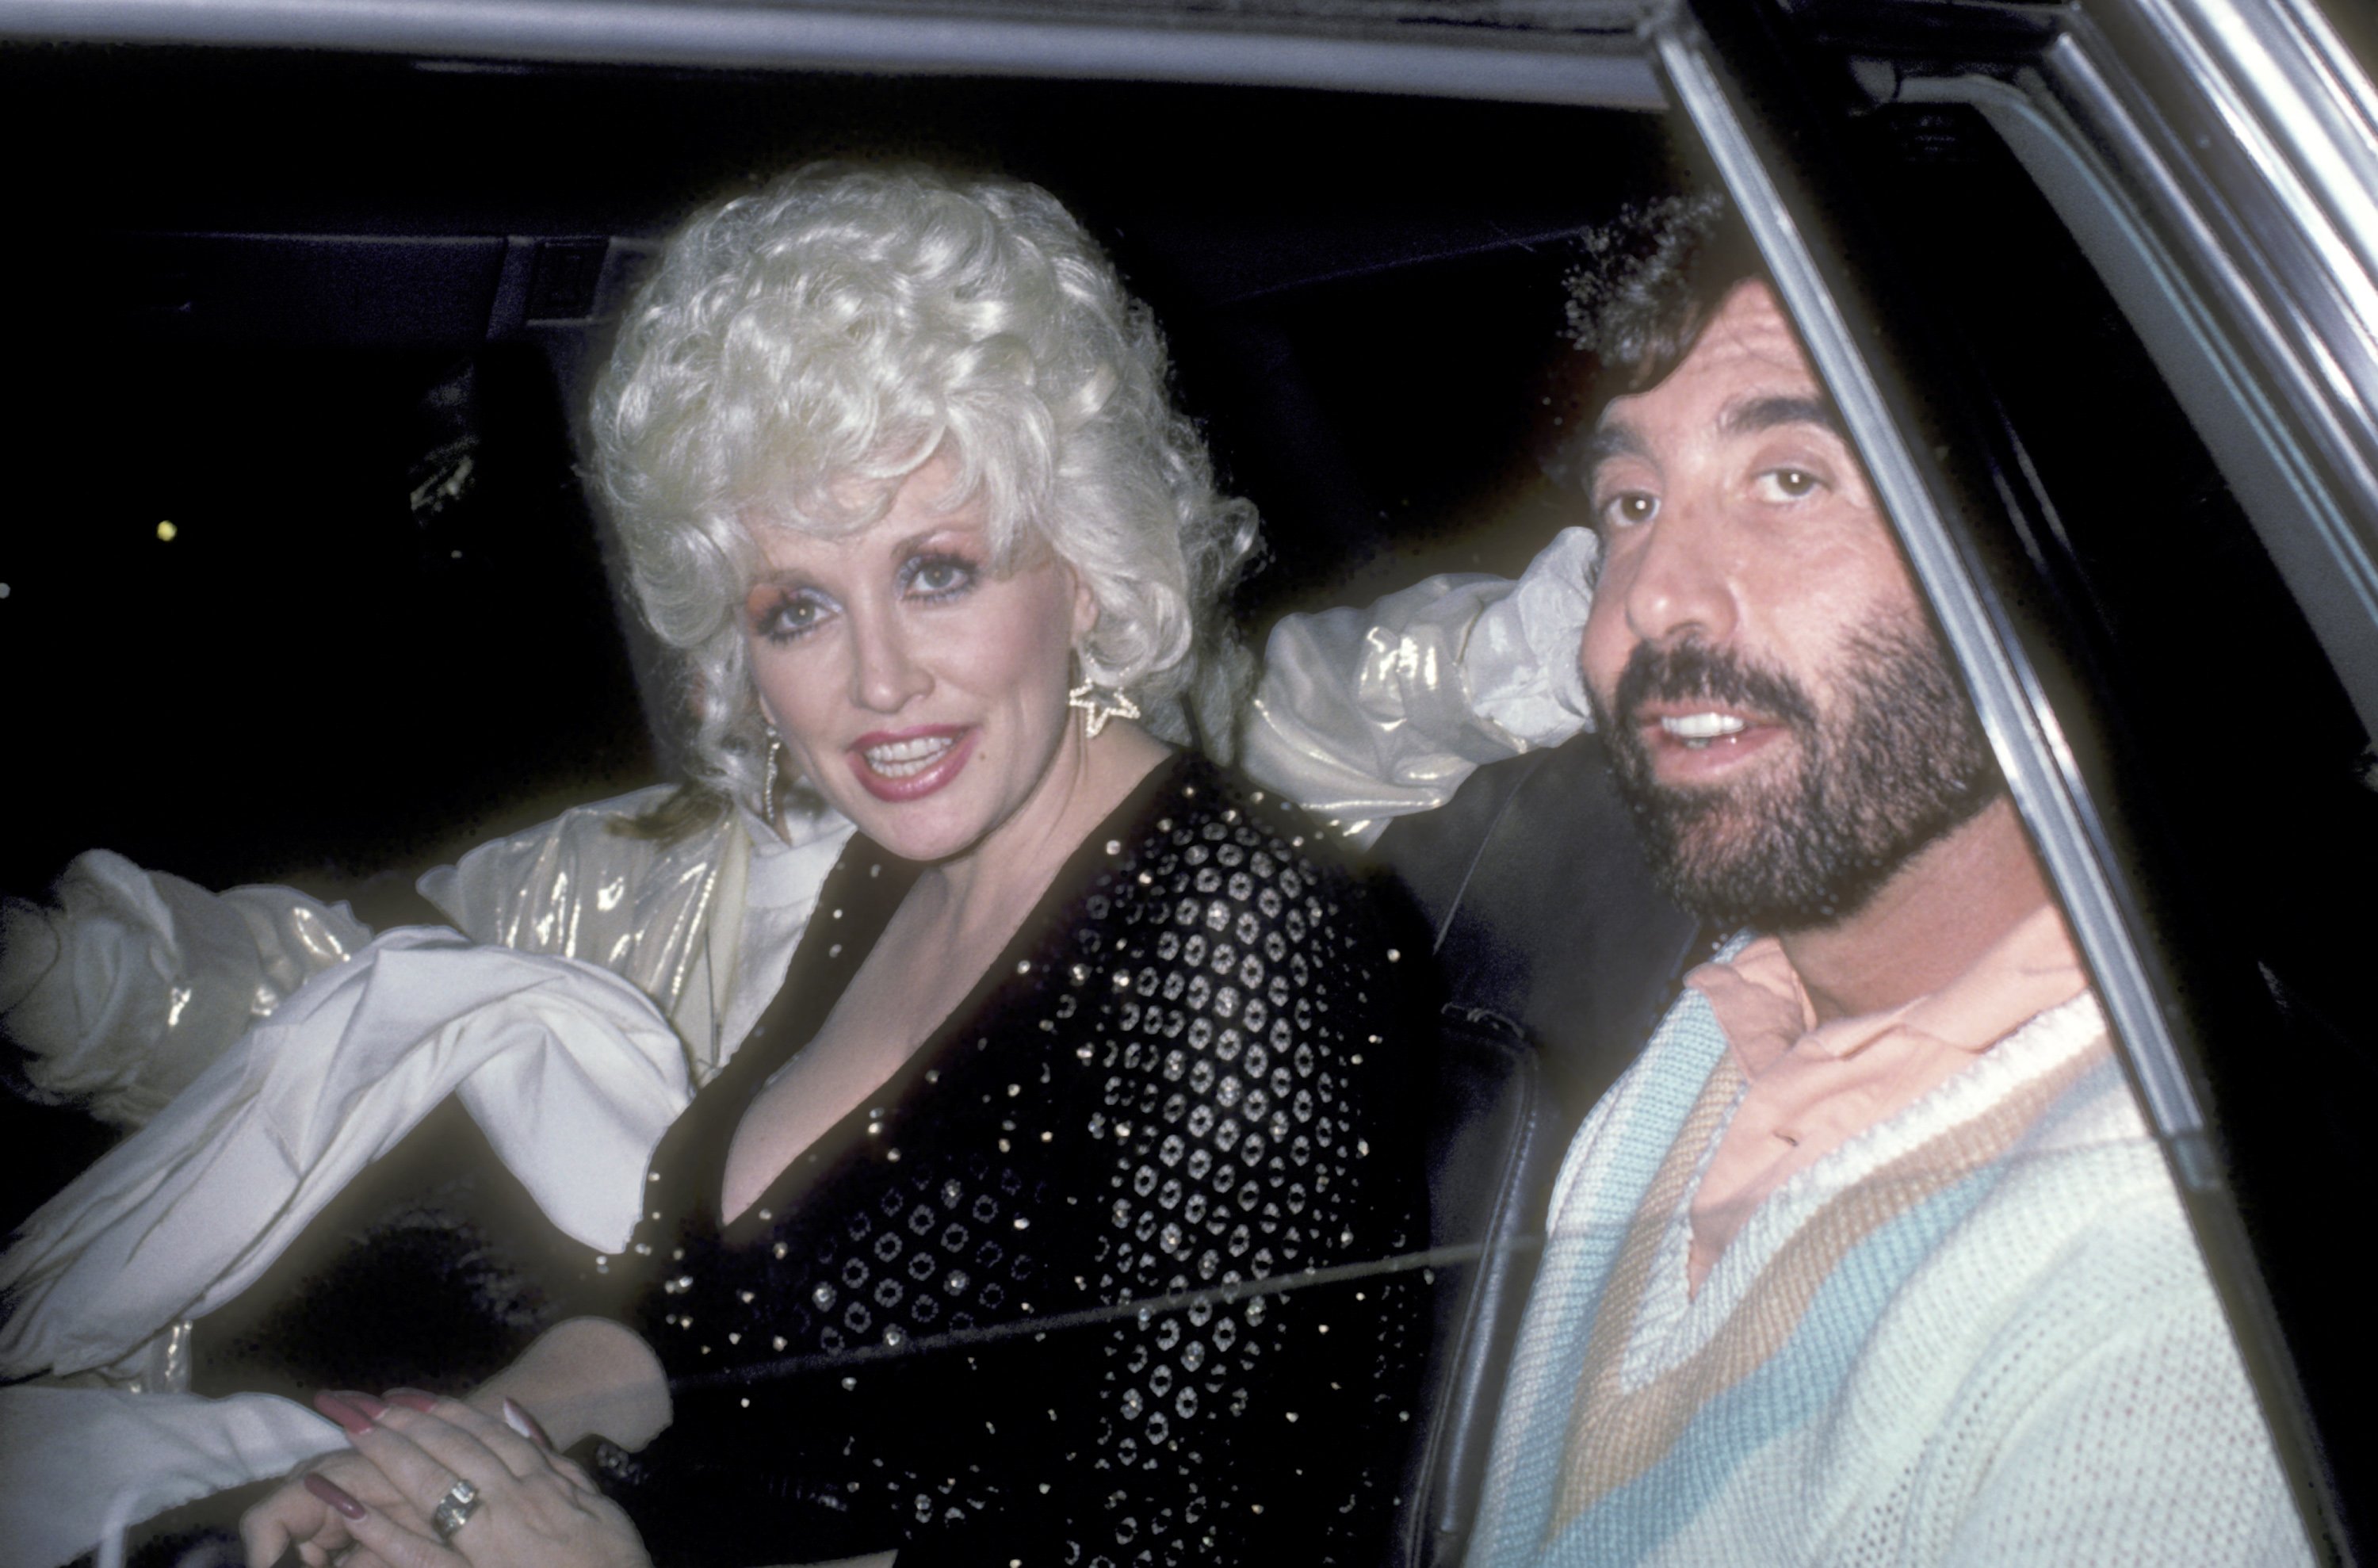 Musician Parton and Manager/Producer Sandy Gallin on October 1, 1985 leaving Rao's Restaurant in New York City, New York.